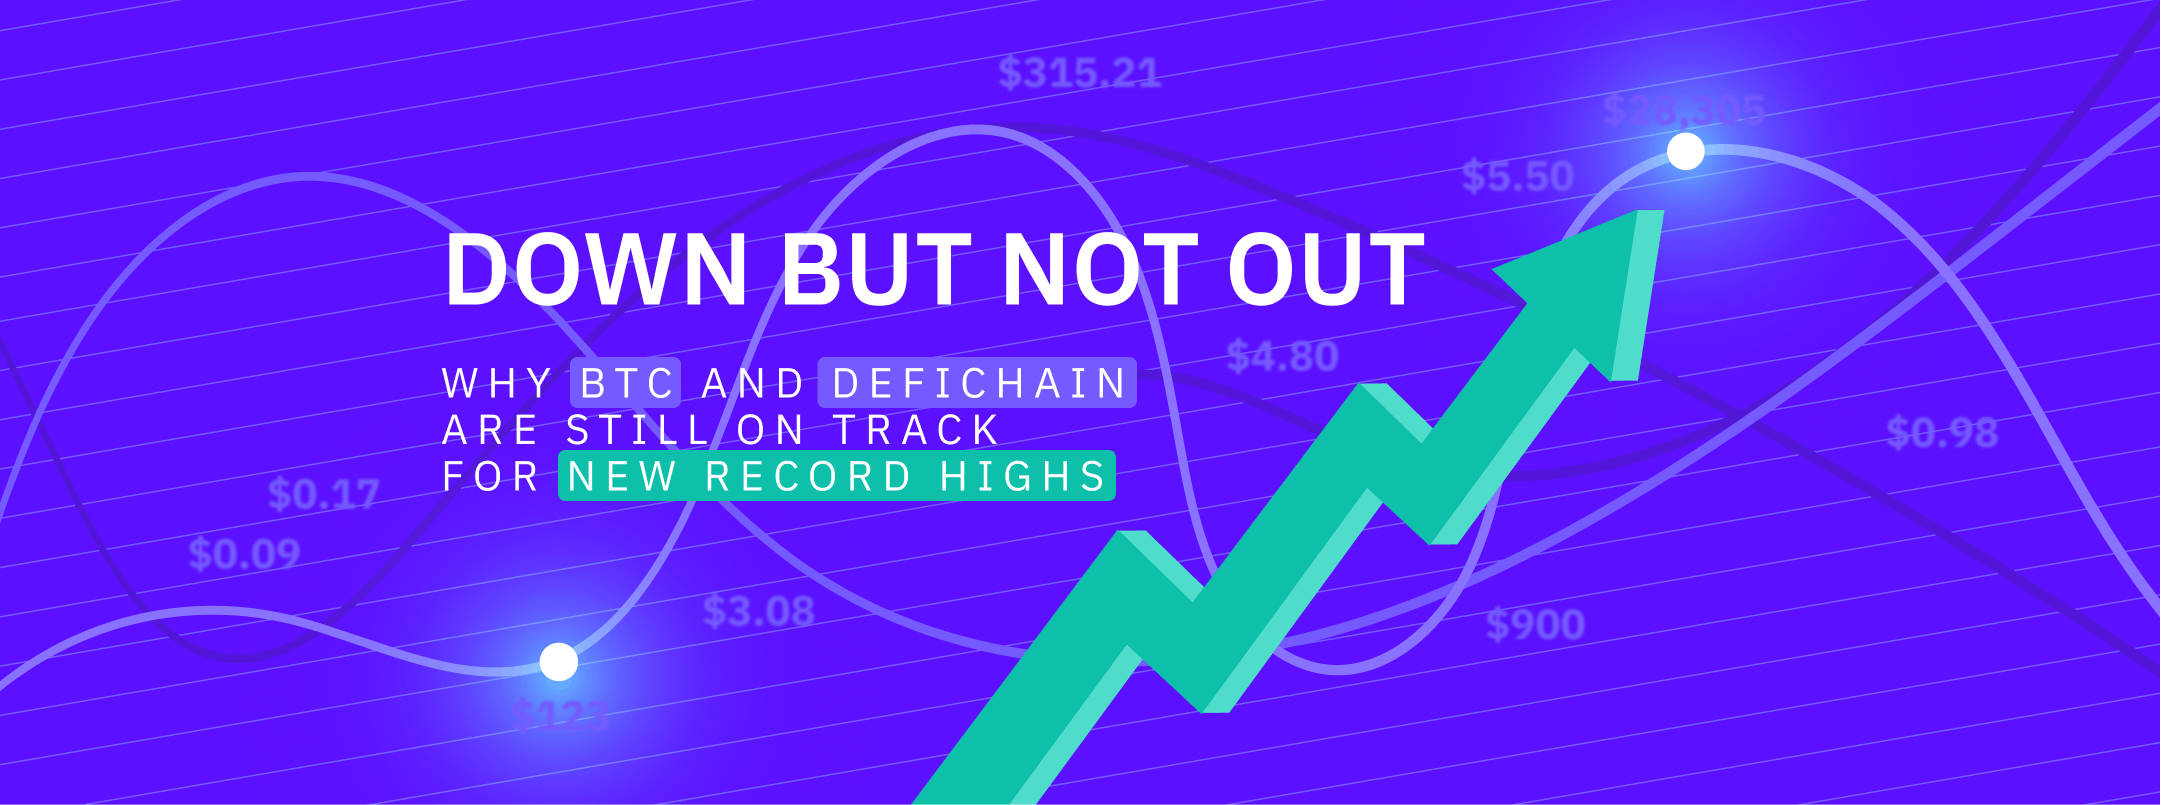 DOWN BUT NOT OUT - Why BTC And DeFiChain Are Still On Track for New Record Highs